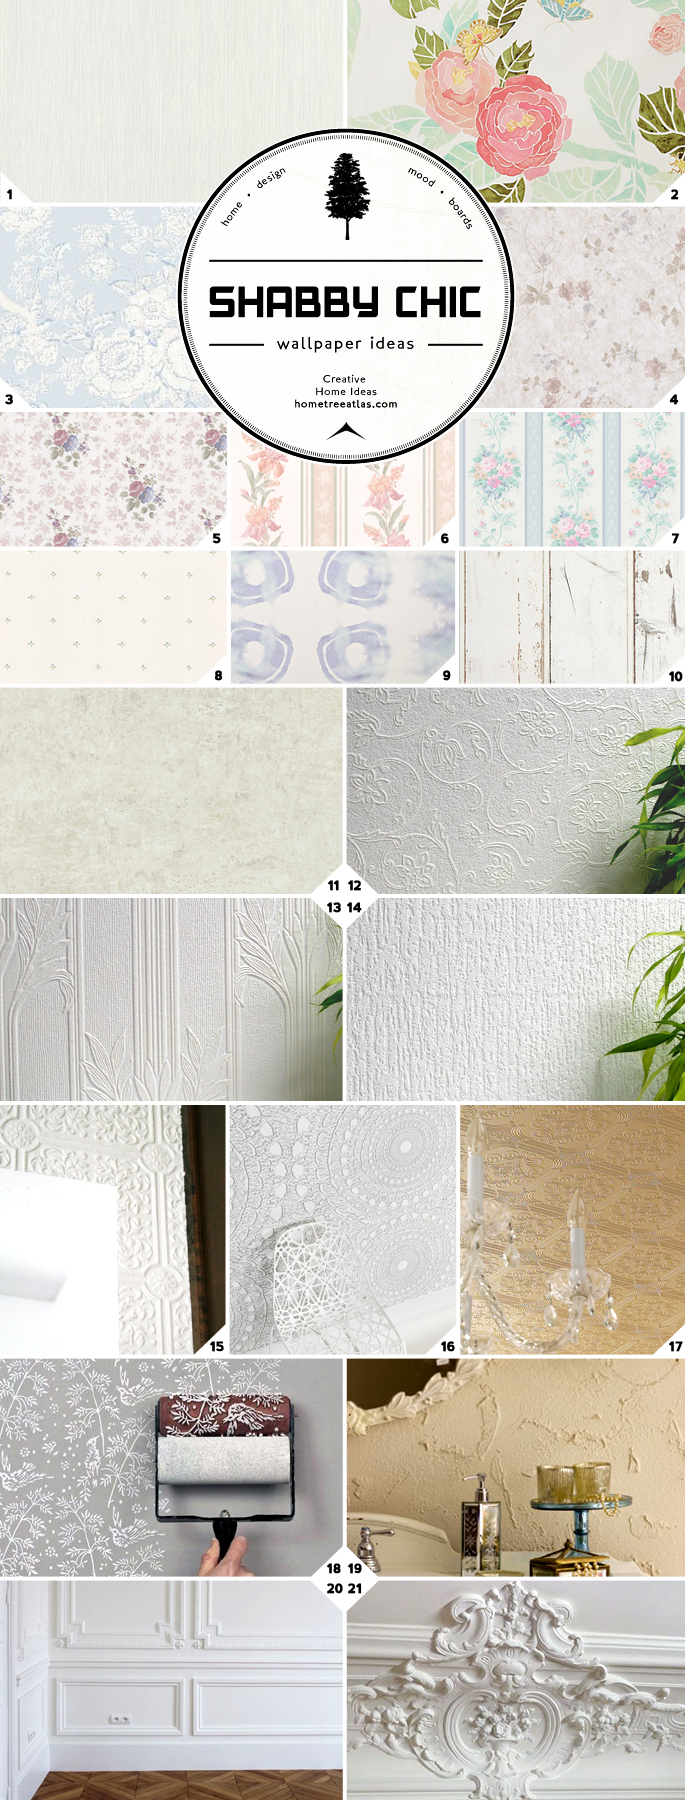 Most Of The Shabby Chic Wallpaper Designs And Ideas In Mood Board